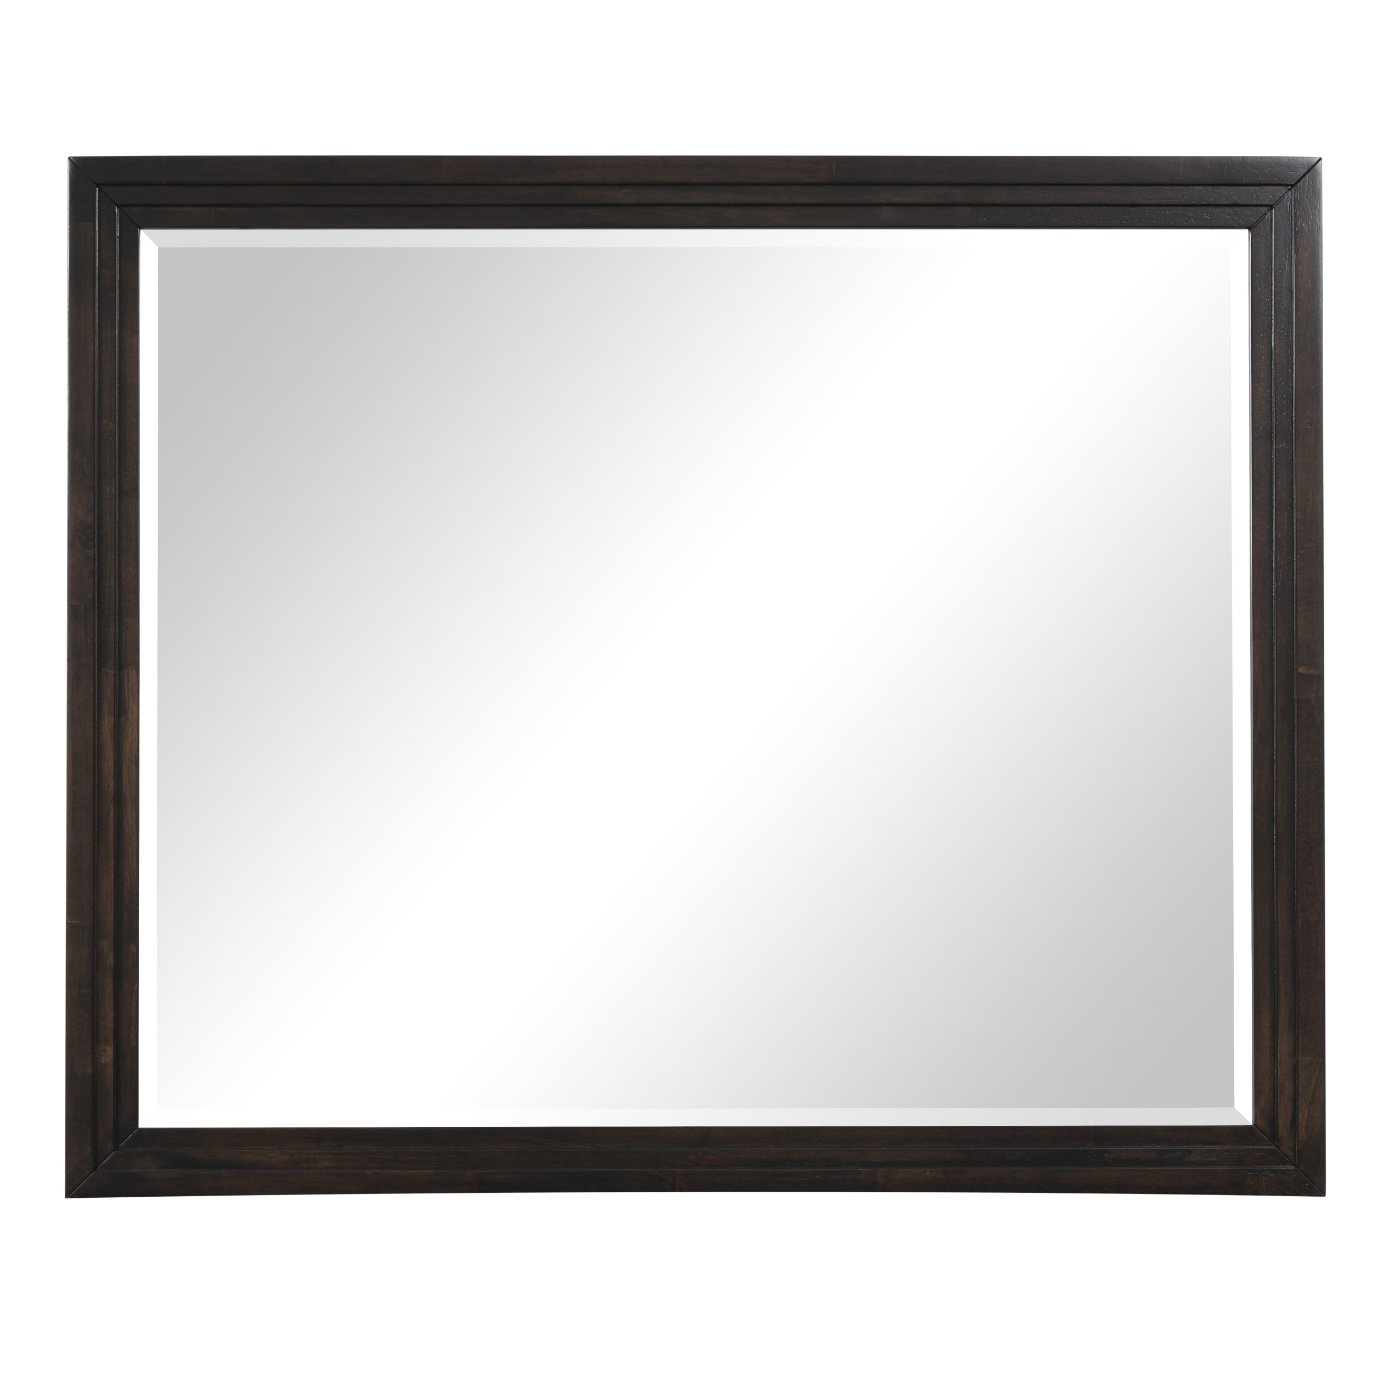 Larchmont Charcoal Mirror (Mirror Only)